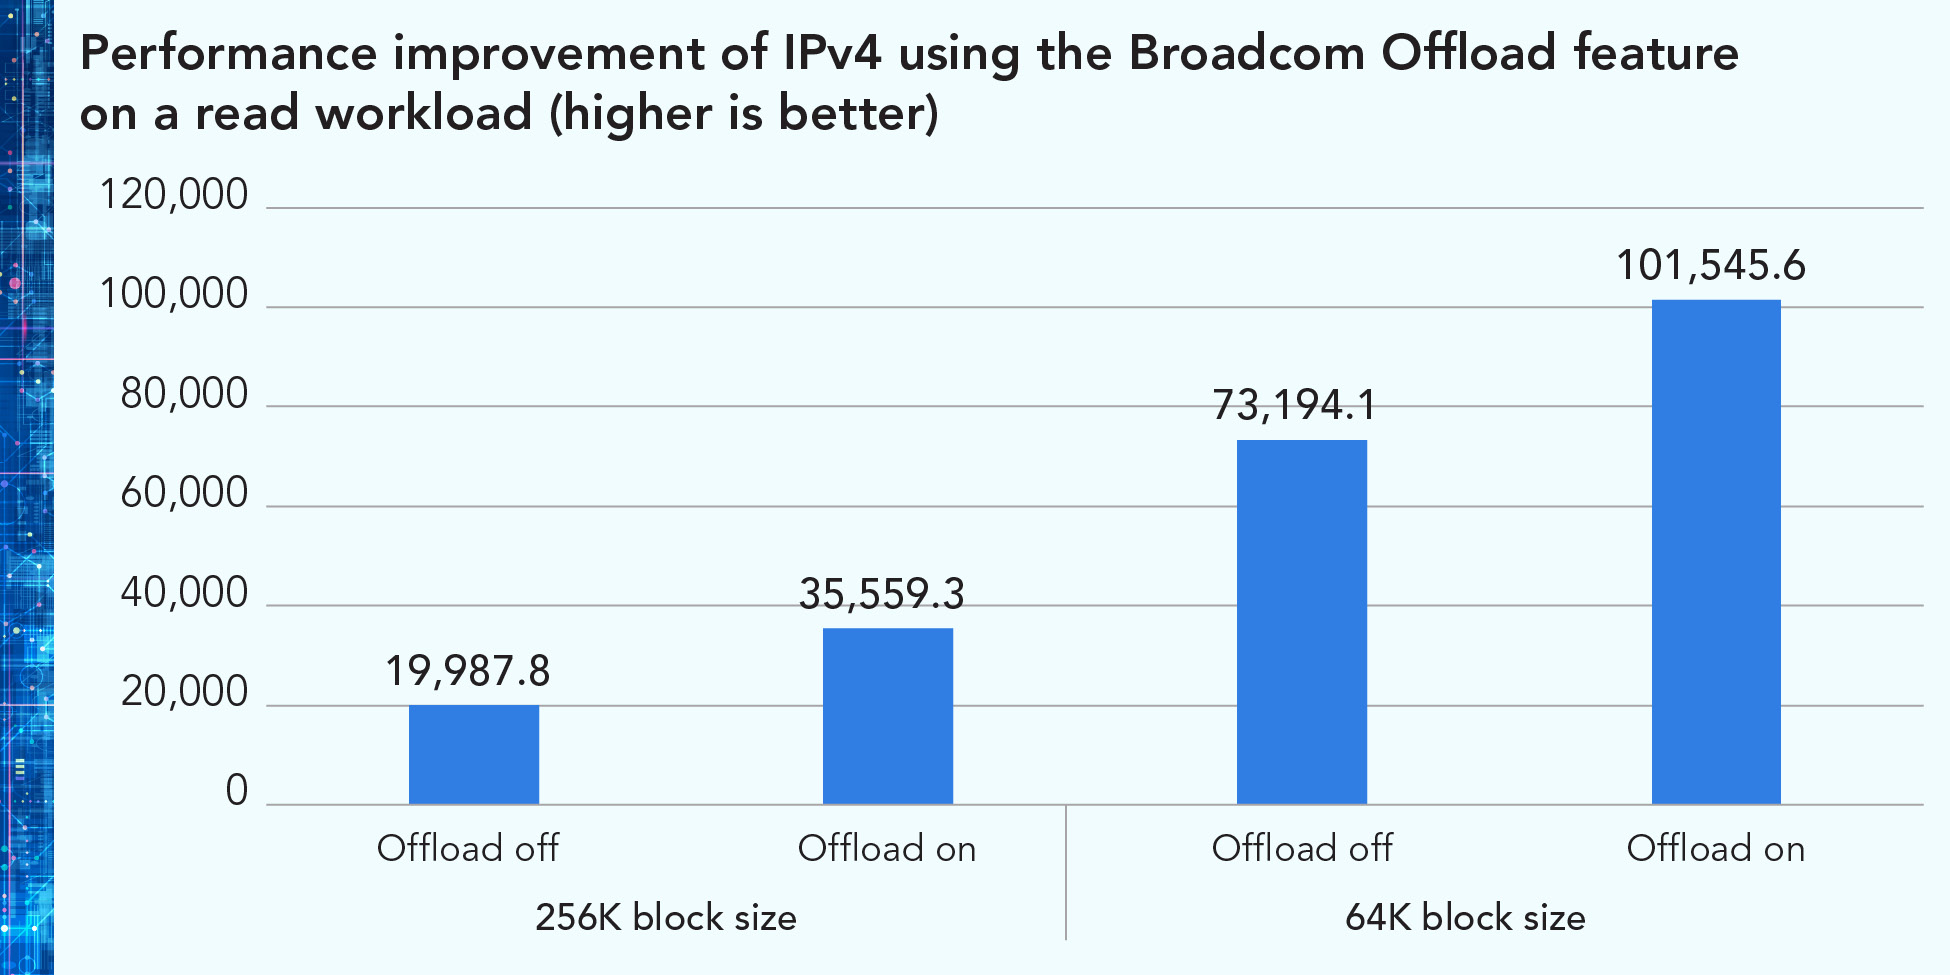 Chart showing performance improvement of IPv4 using Offload feature on a read workload. Higher is better. At the 256K block size, the score was 19,987.8 with Offload off and 35,559.3 with Offload on. At the 64K block size, the score was 73,194.1 with Offload off and 101,545.6 with Offload on.